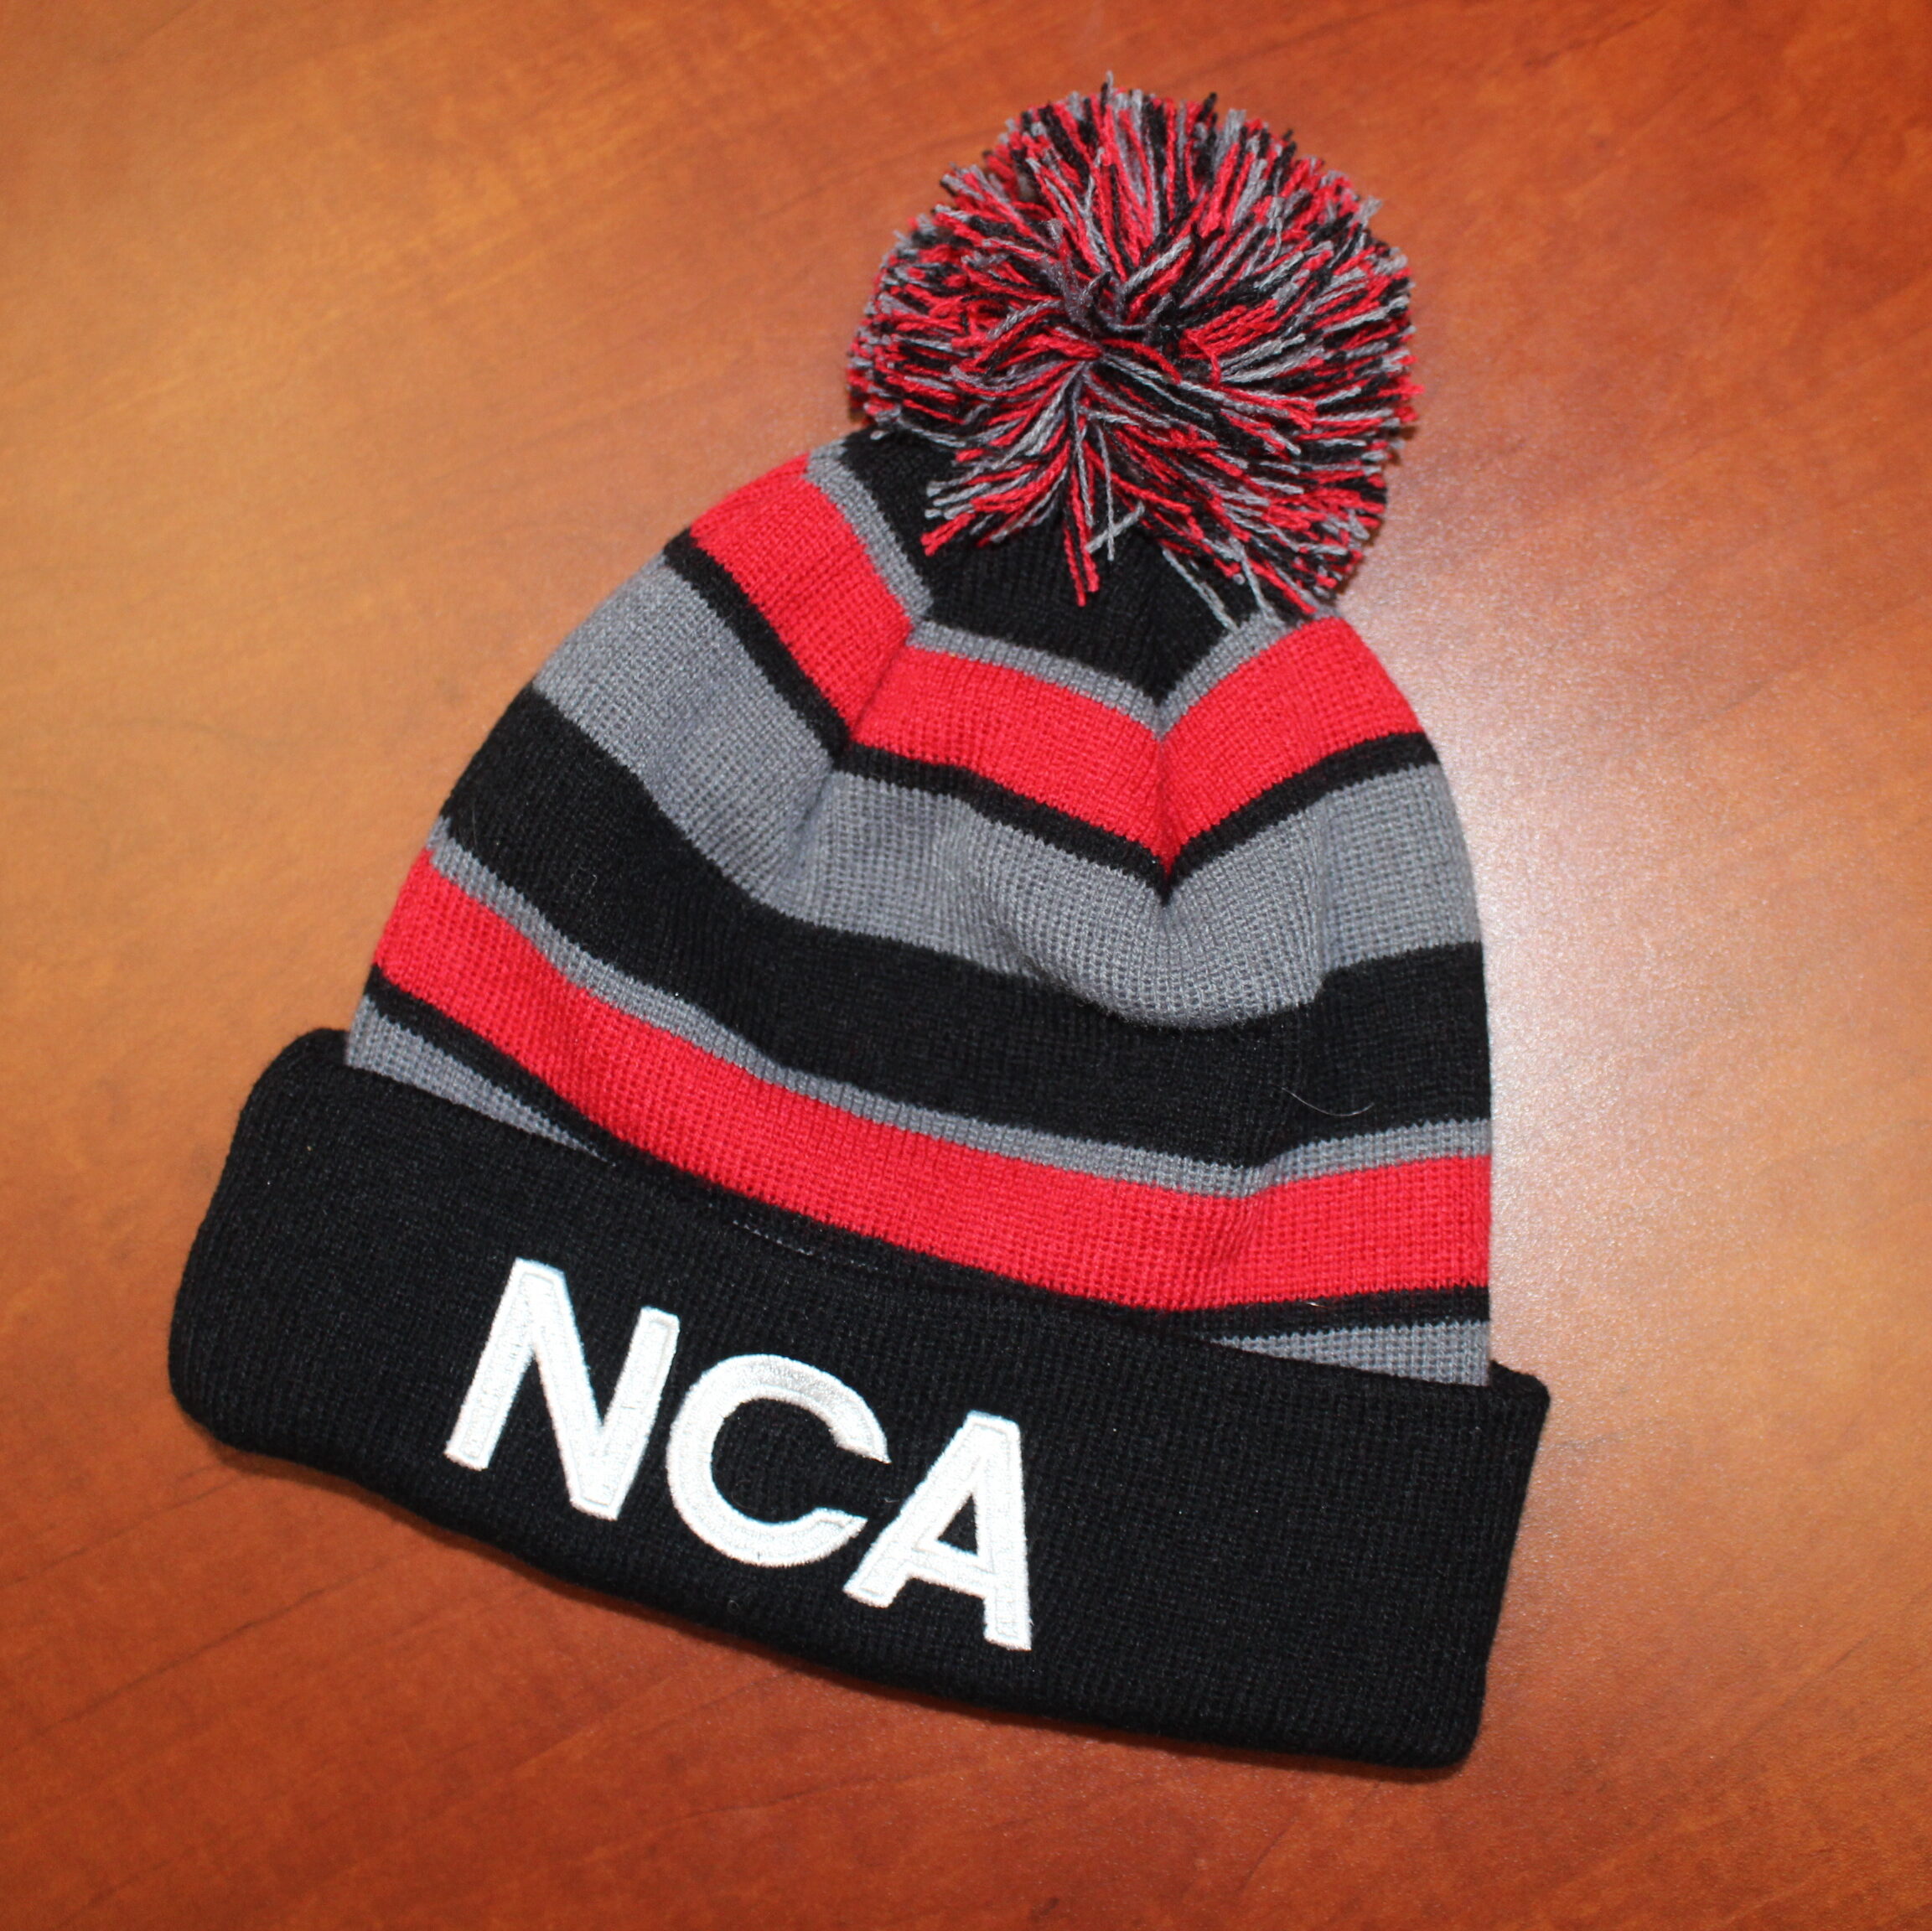 Stocking cap with school colors and the letters, "NCA" on it